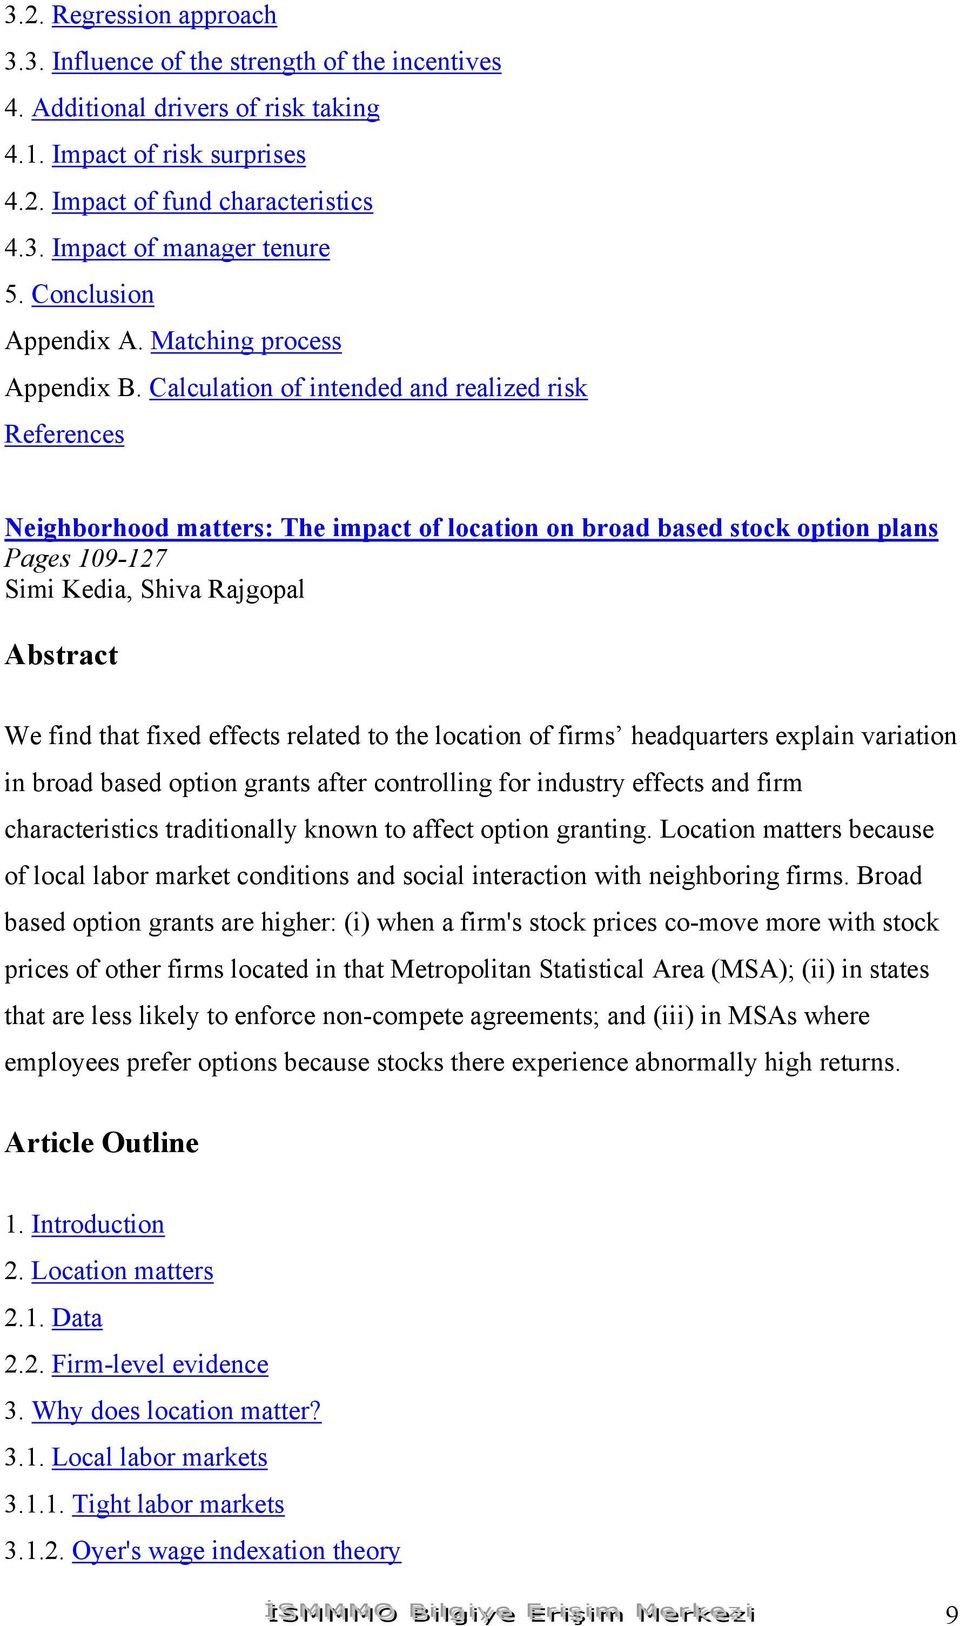 Calculation of intended and realized risk Neighborhood matters: The impact of location on broad based stock option plans Pages 109-127 Simi Kedia, Shiva Rajgopal We find that fixed effects related to